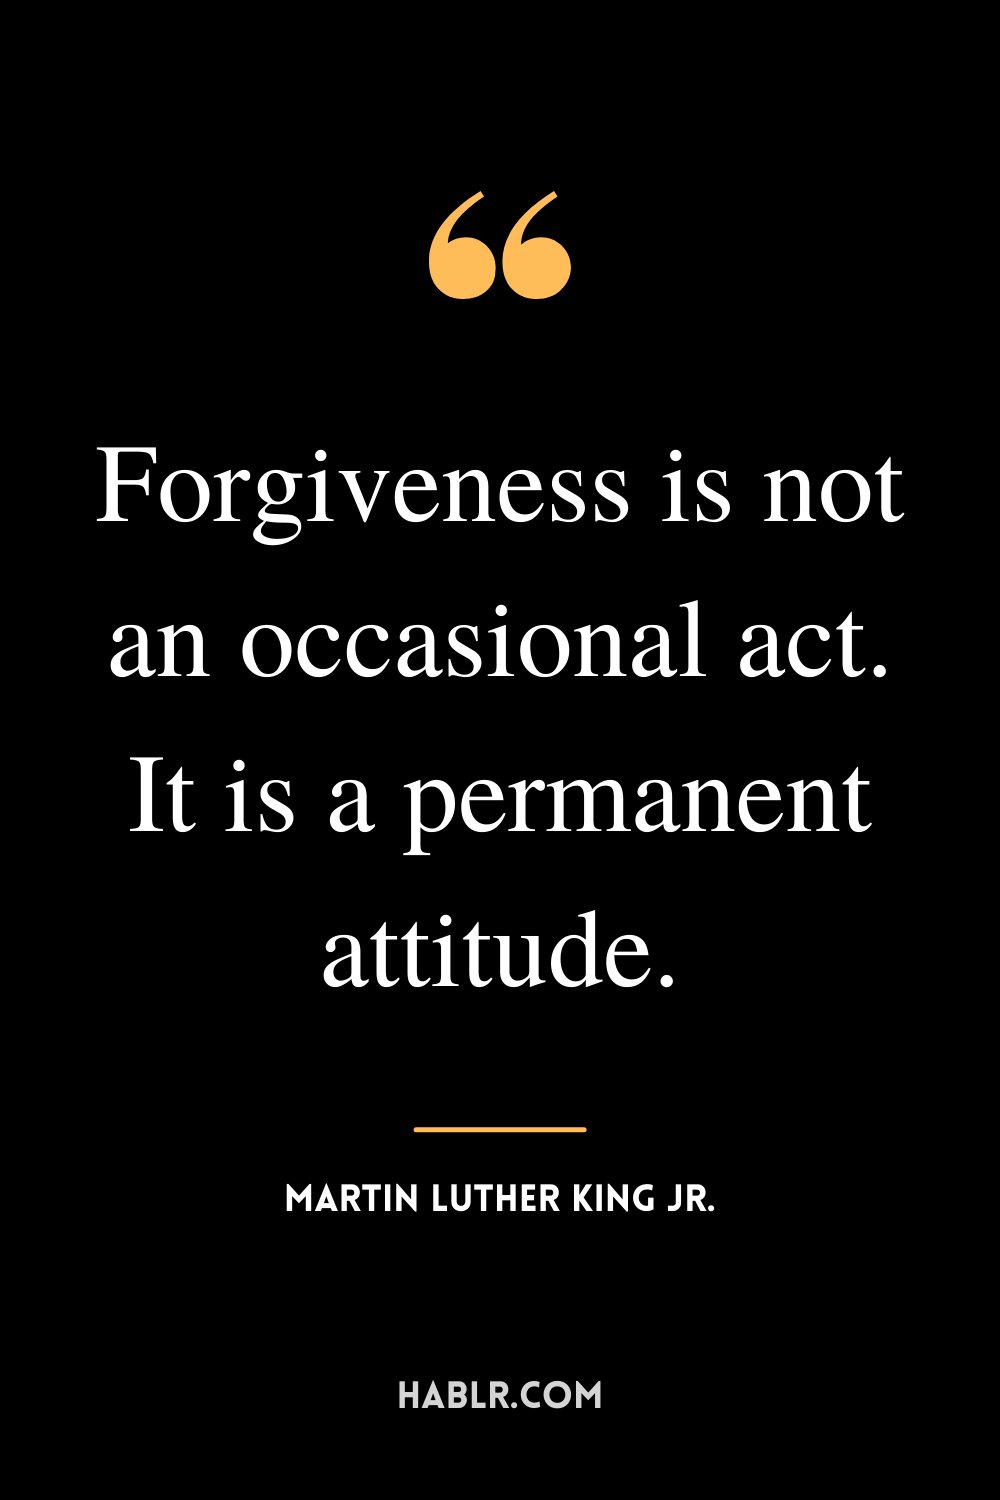 “Forgiveness is not an occasional act. It is a permanent attitude.” -Martin Luther King Jr.